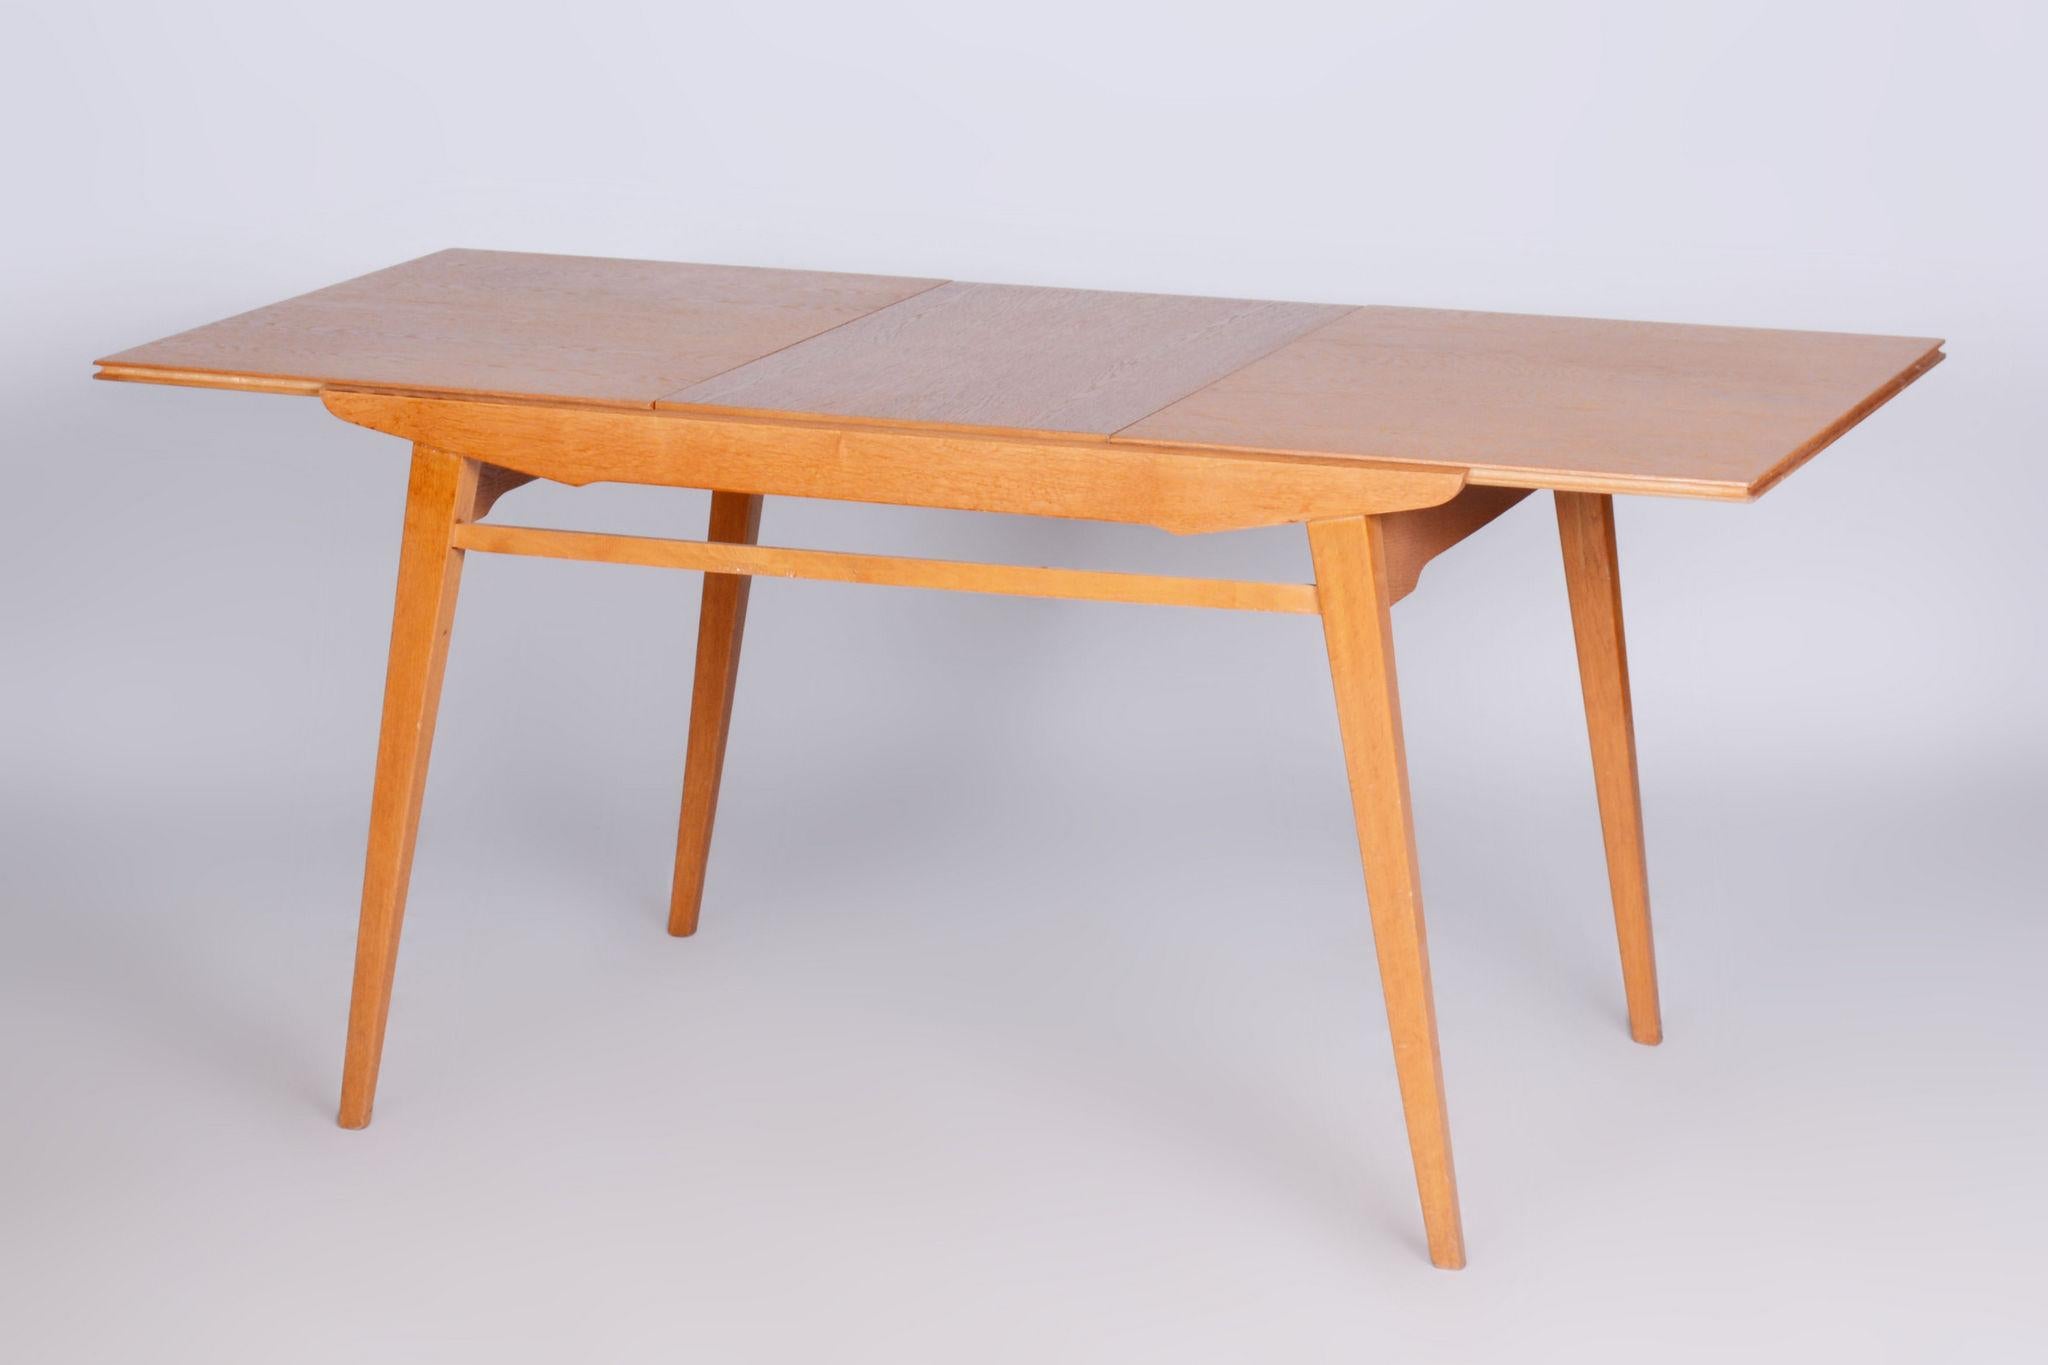 Restored Midcentury Oak Extendable Dining Table, Revived Polish, Czechia, 1950s For Sale 2